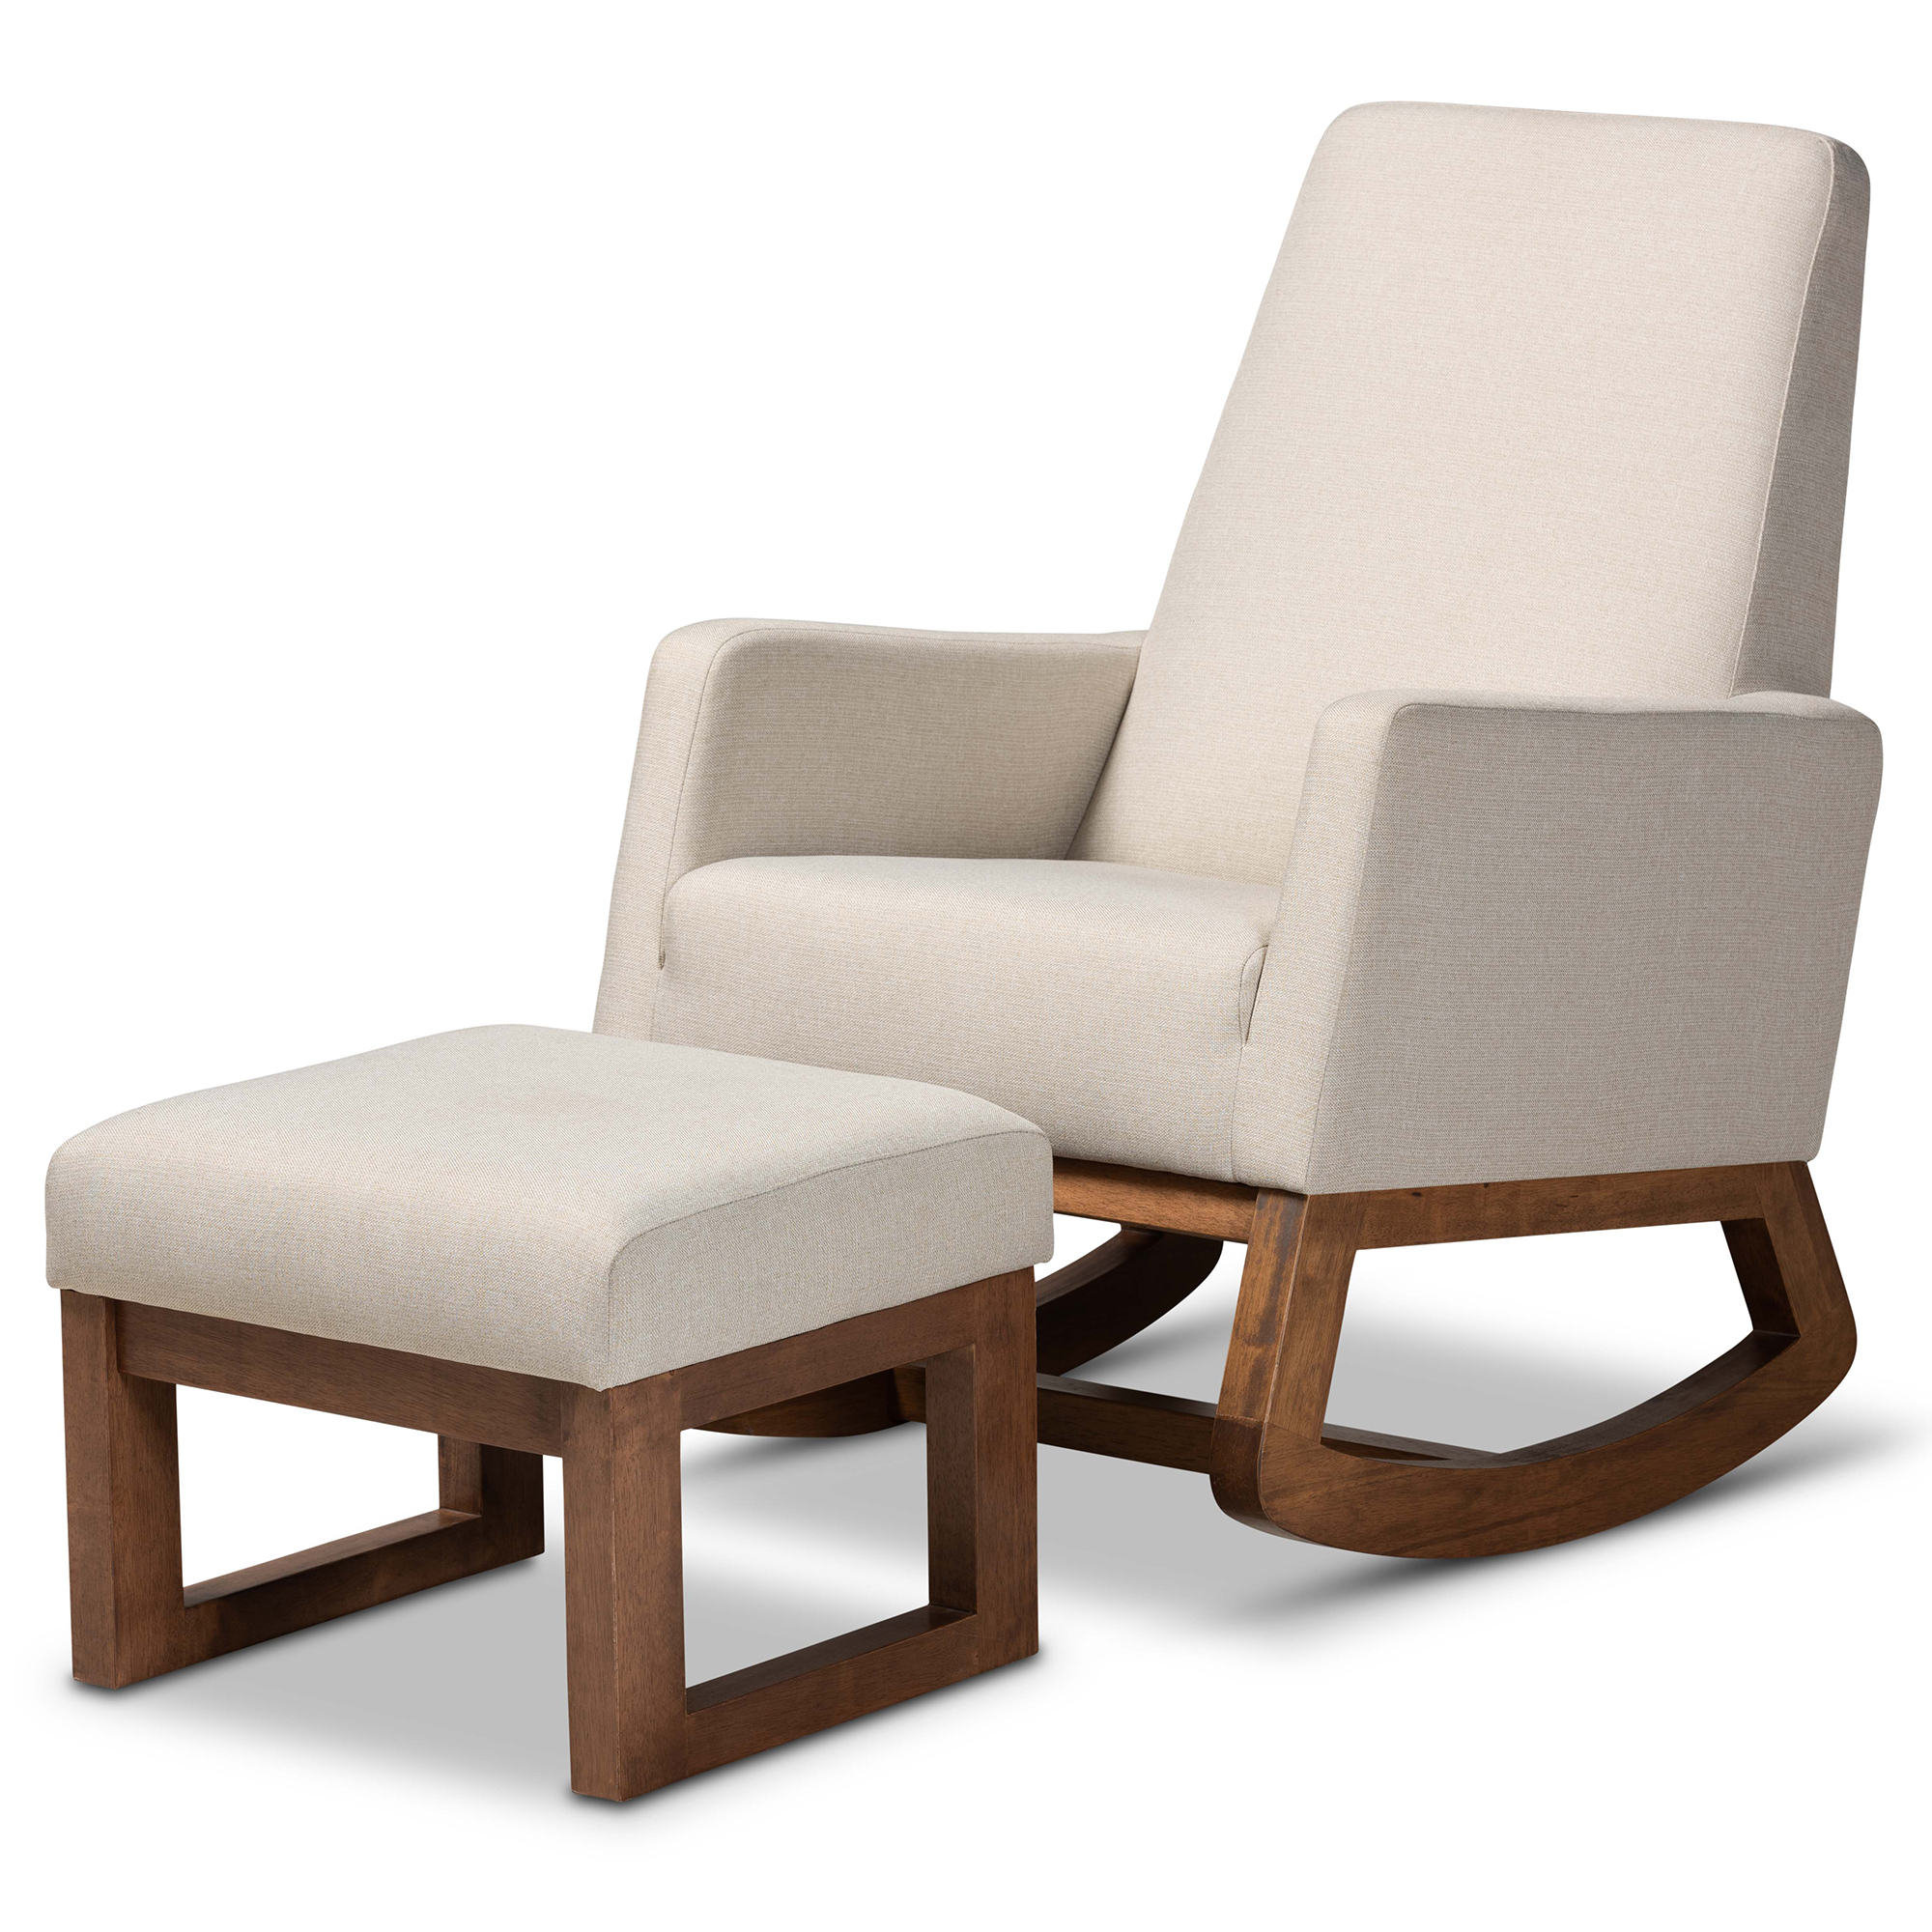 Baxton Studio Yashiya Mid-century Retro Modern Light Beige Fabric Upholstered Rocking Chair and Ottoman Set Affordable modern furniture in Chicago, classic living room furniture, modern standard ottomans and chairs, cheap standard ottomans set